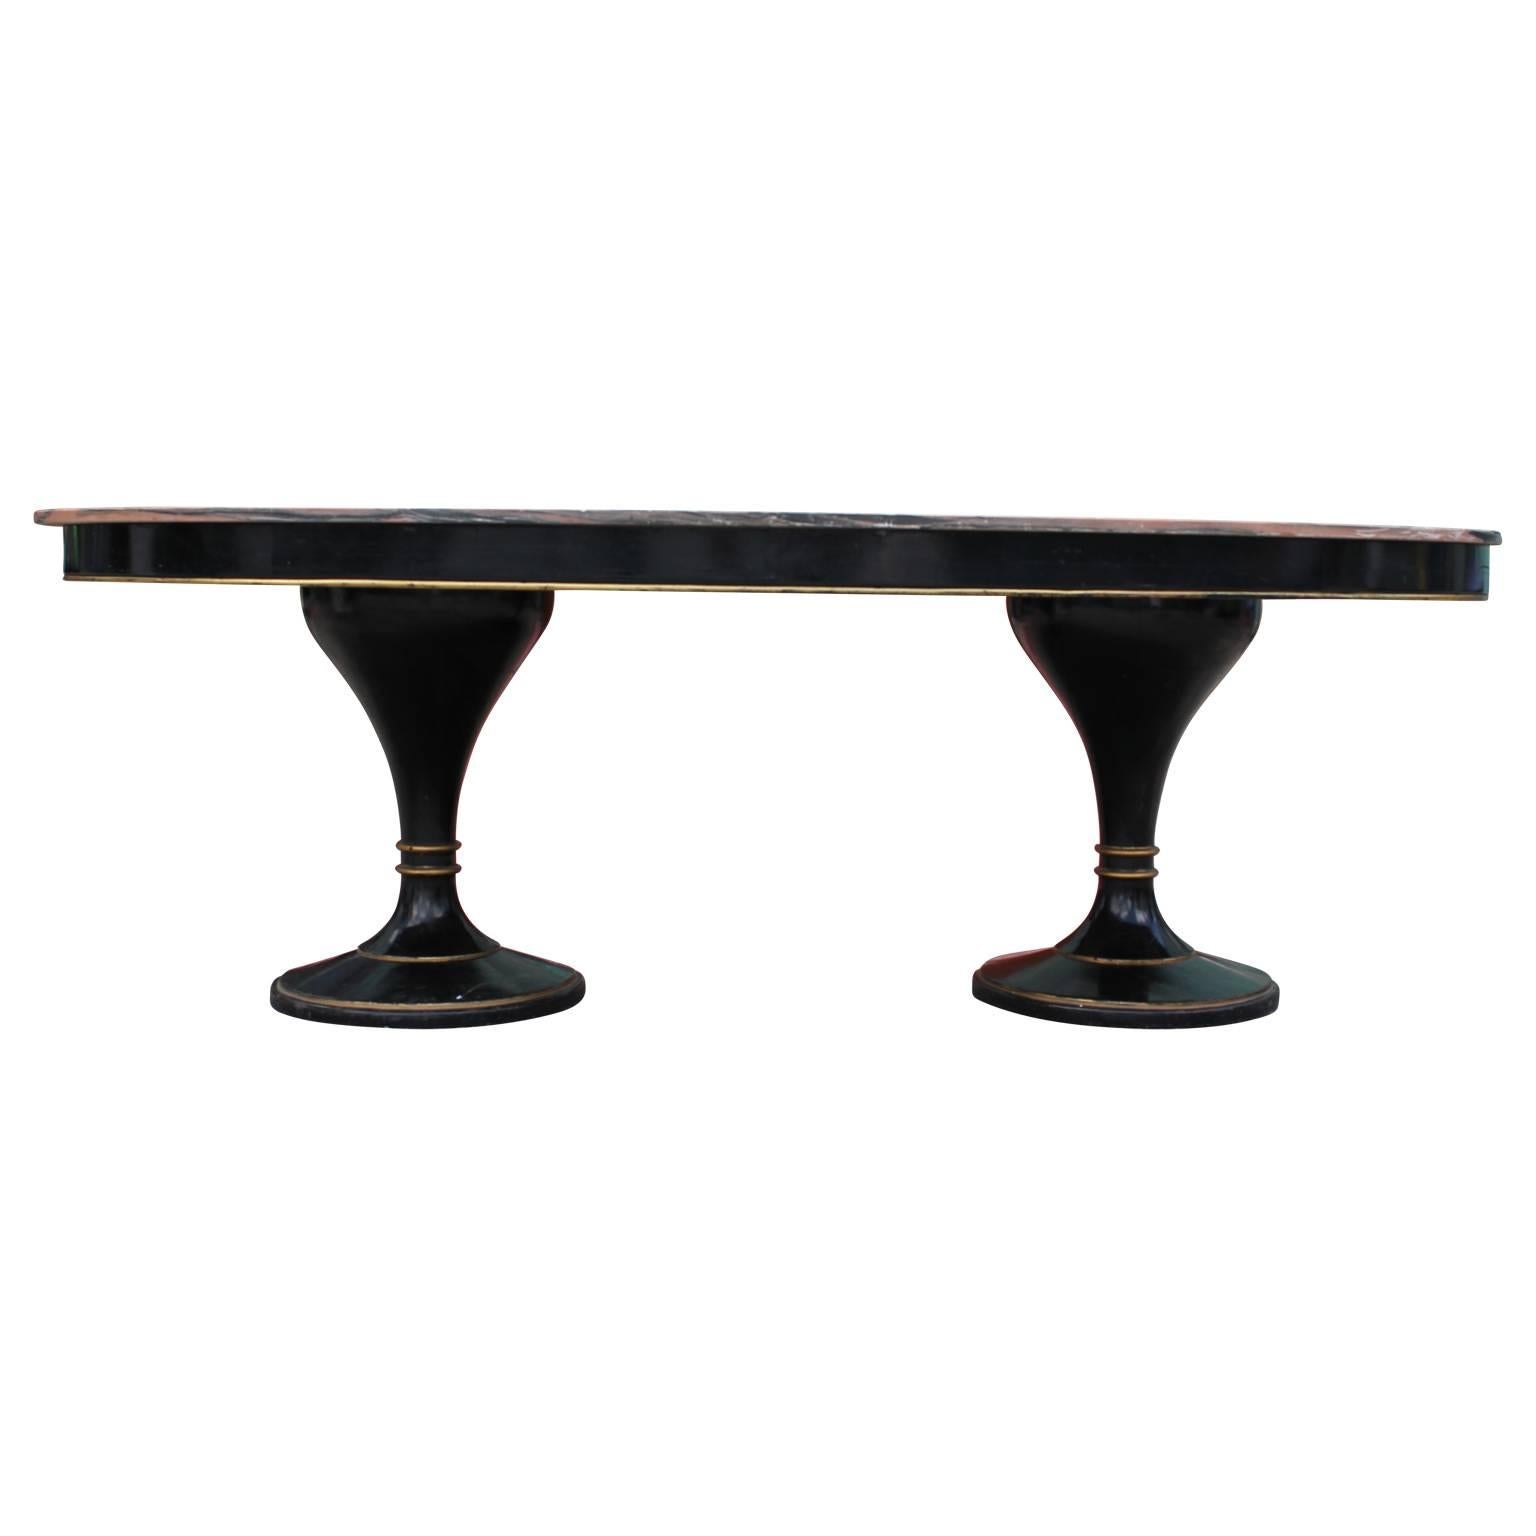 Argentine Magnificent Oval Top Dining Table with Pink Marble Attr. Maison Jansen